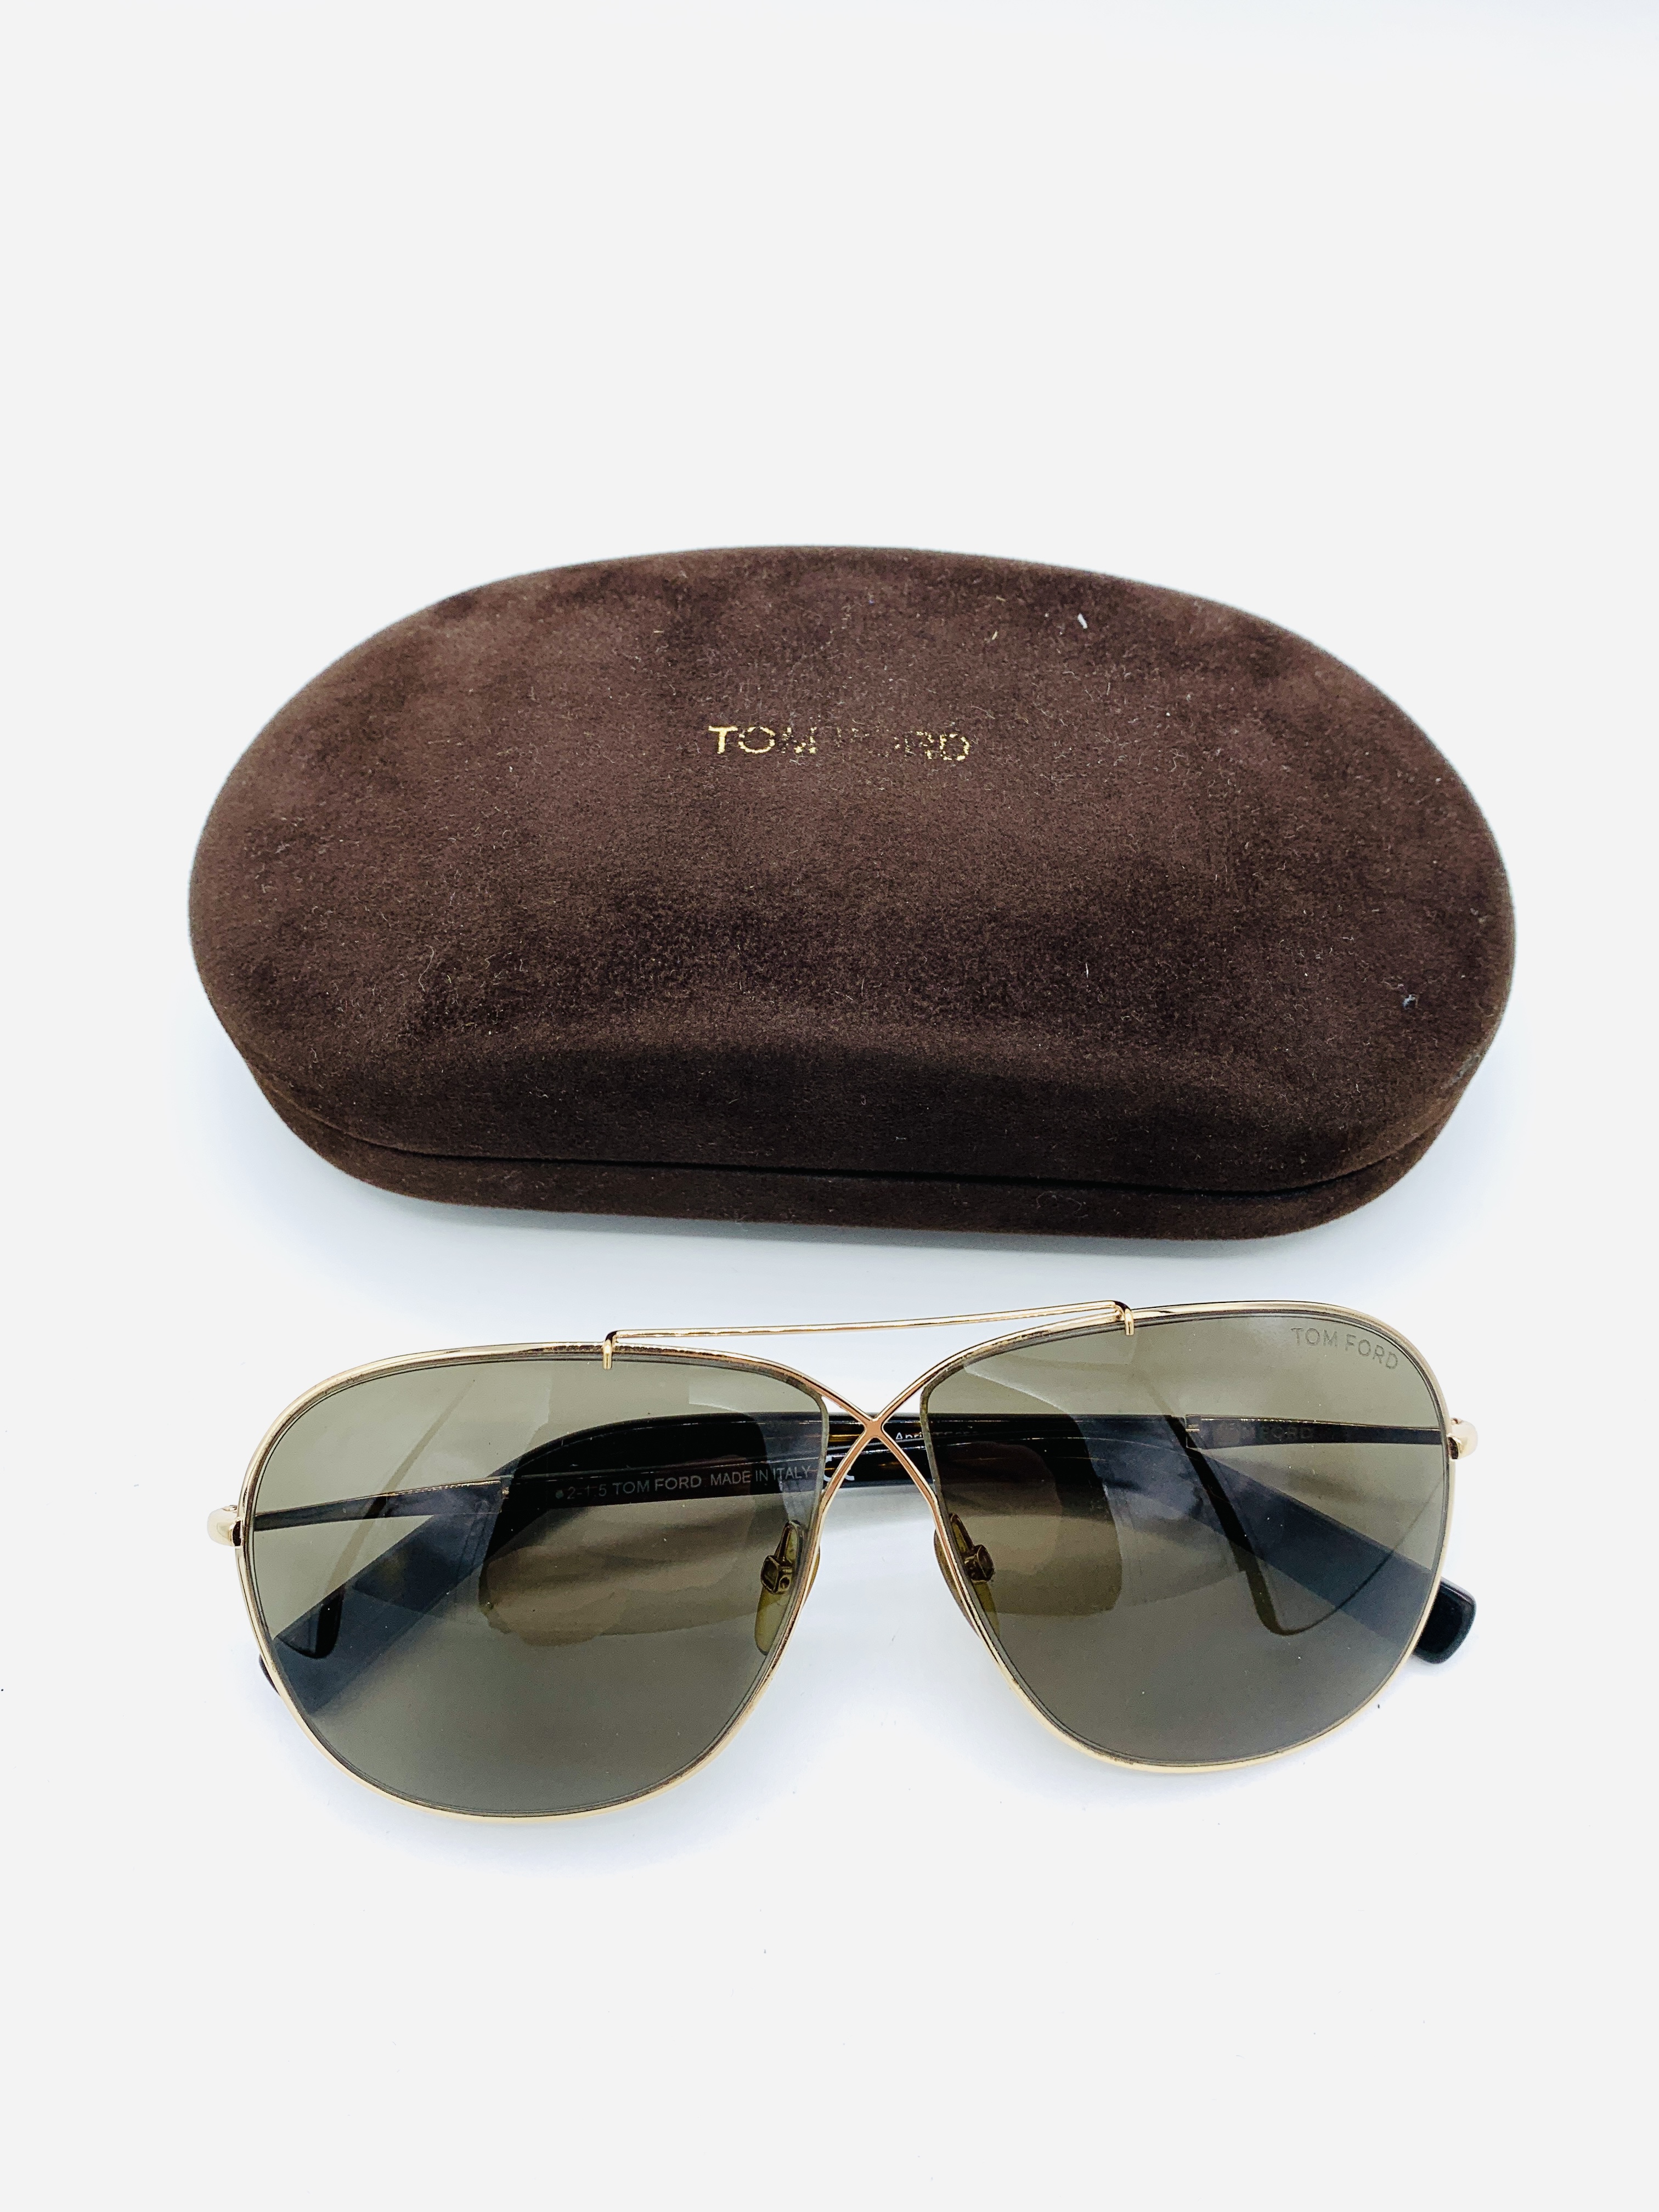 Pair of Tom Ford sunglasses.